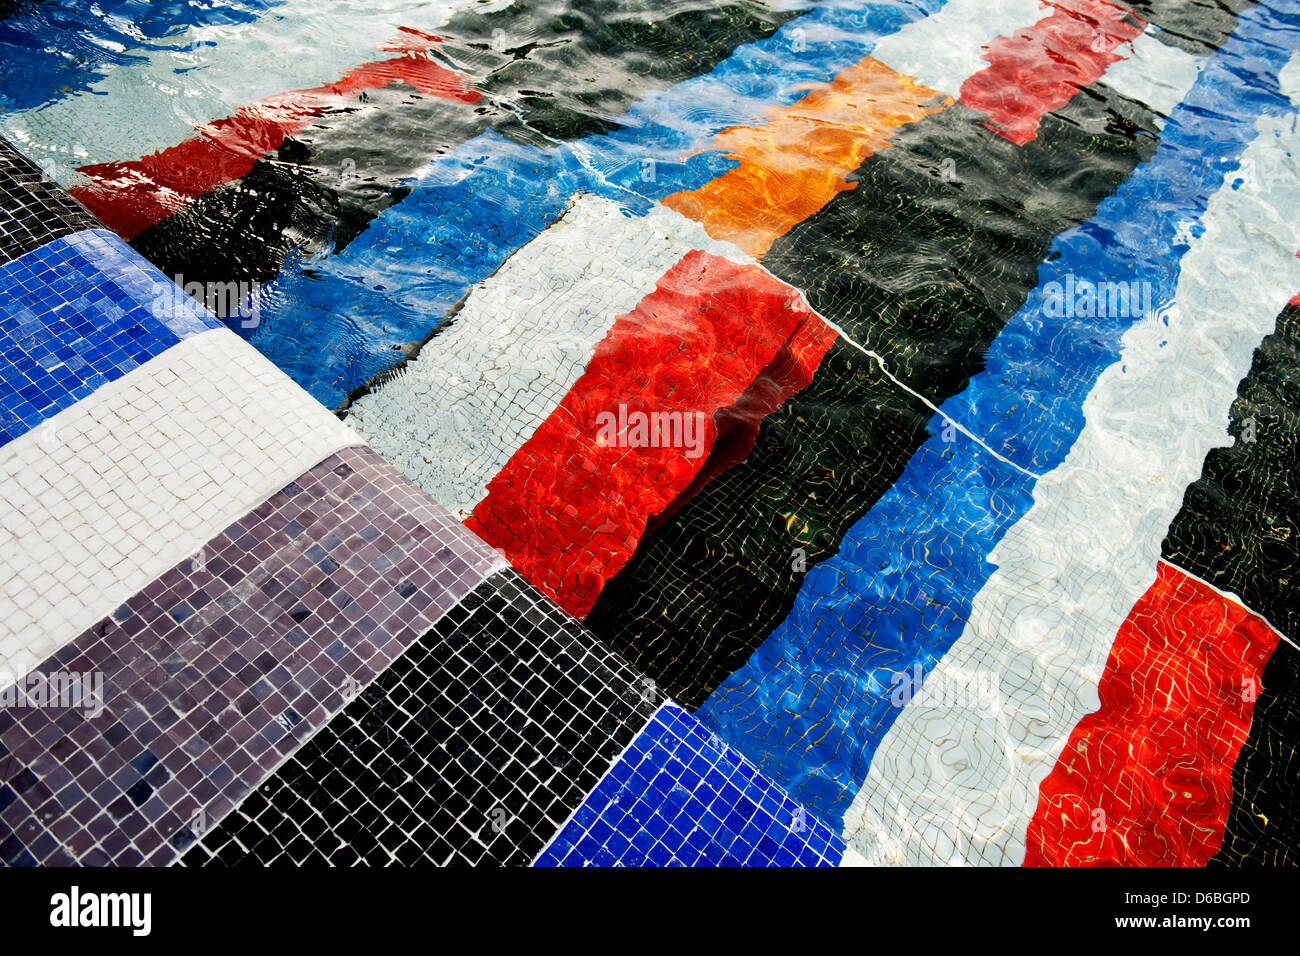 Colorful tiles in swimming pool Stock Photo